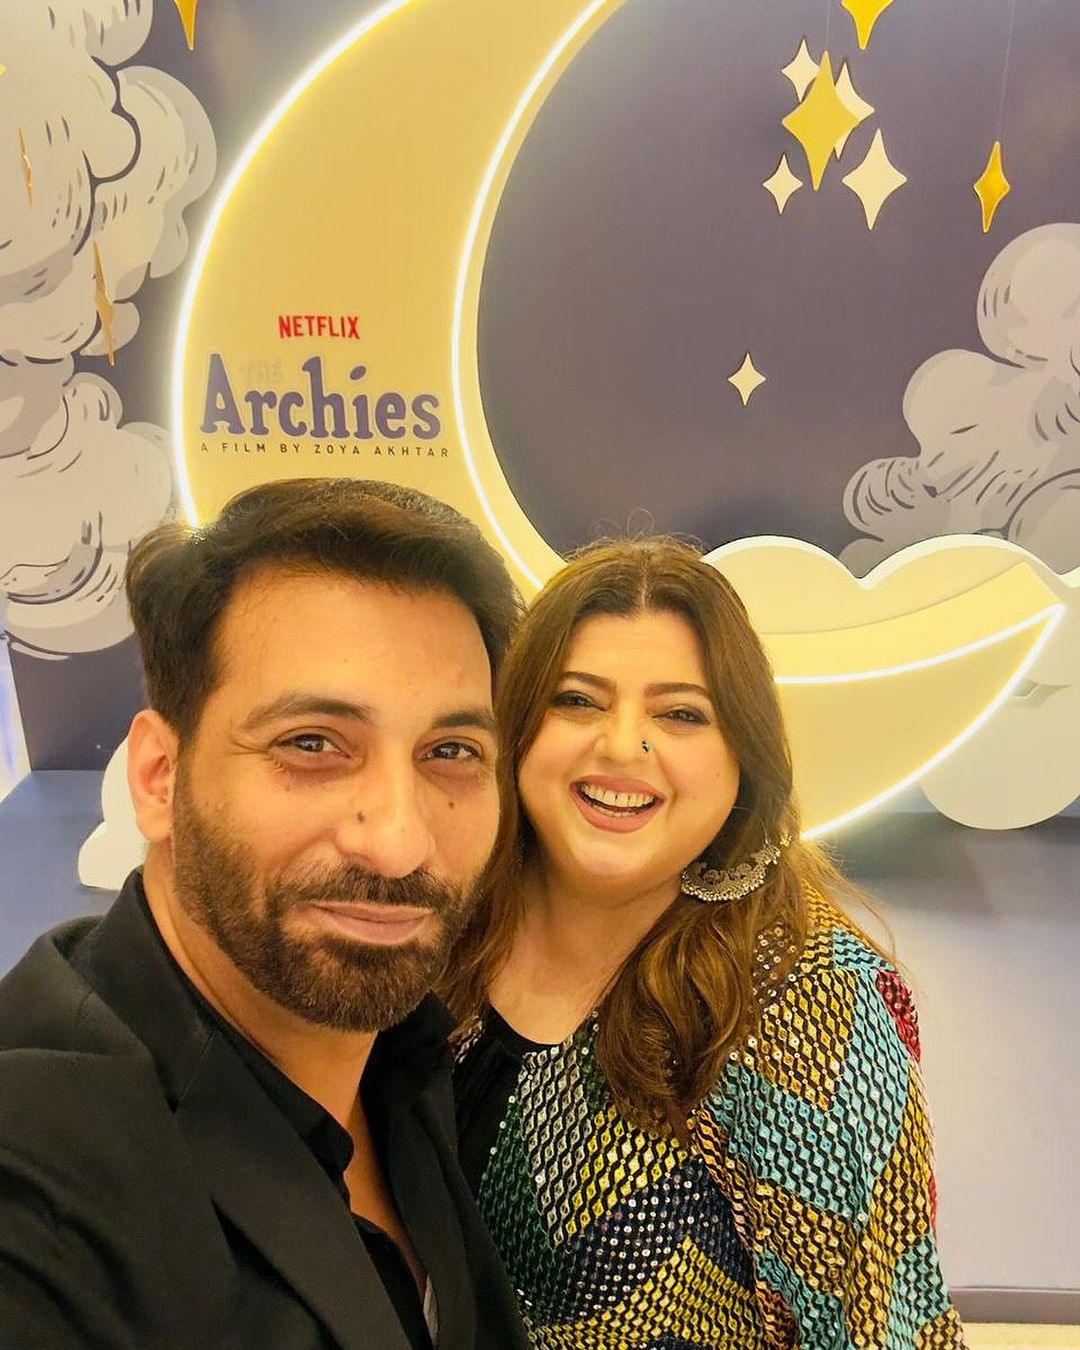 Delnaaz Irani Takes Part In The Epic Film ‘The Archies’ And Says, “So Thrilled For My Small Feature In This Epic Film”!